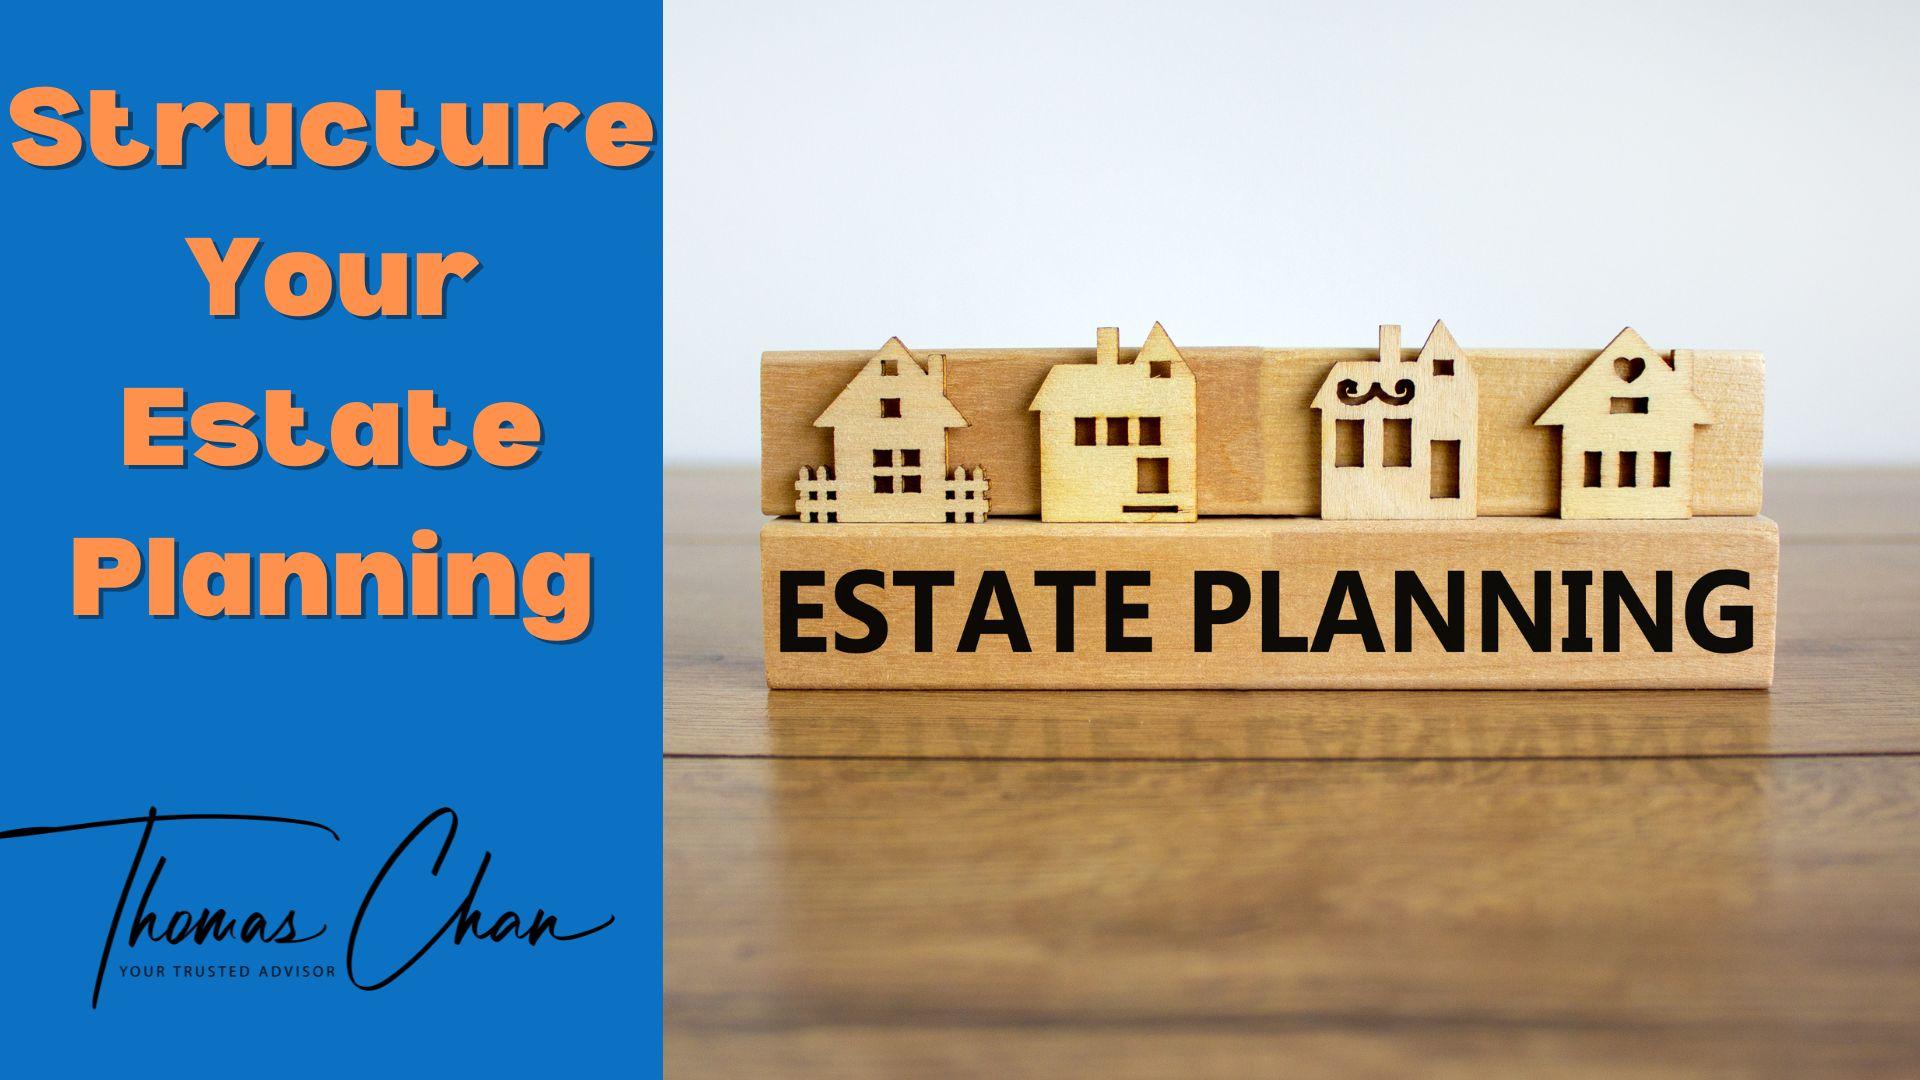 Structure Your Estate Planning by Thomas C Chan